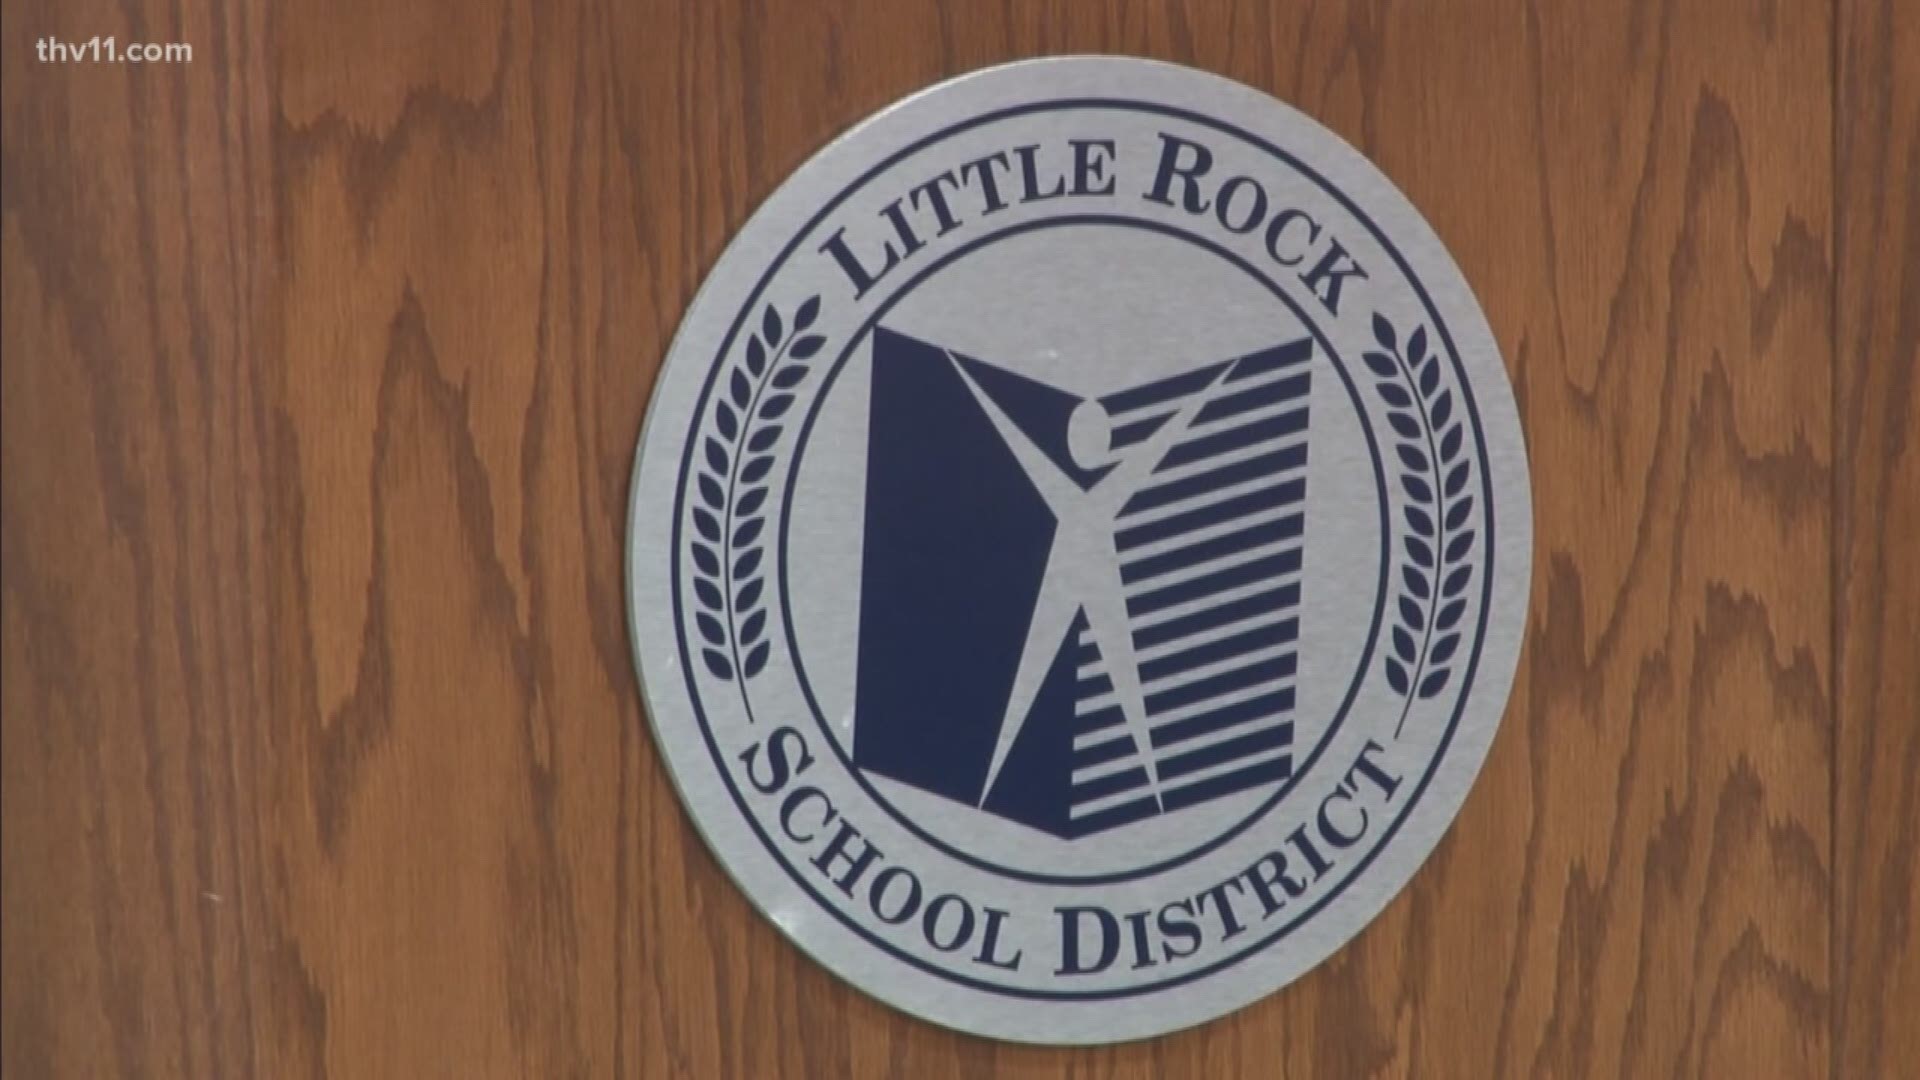 The community is rallying support for Little Rock teachers ahead of a big deadline in contract negotiations.